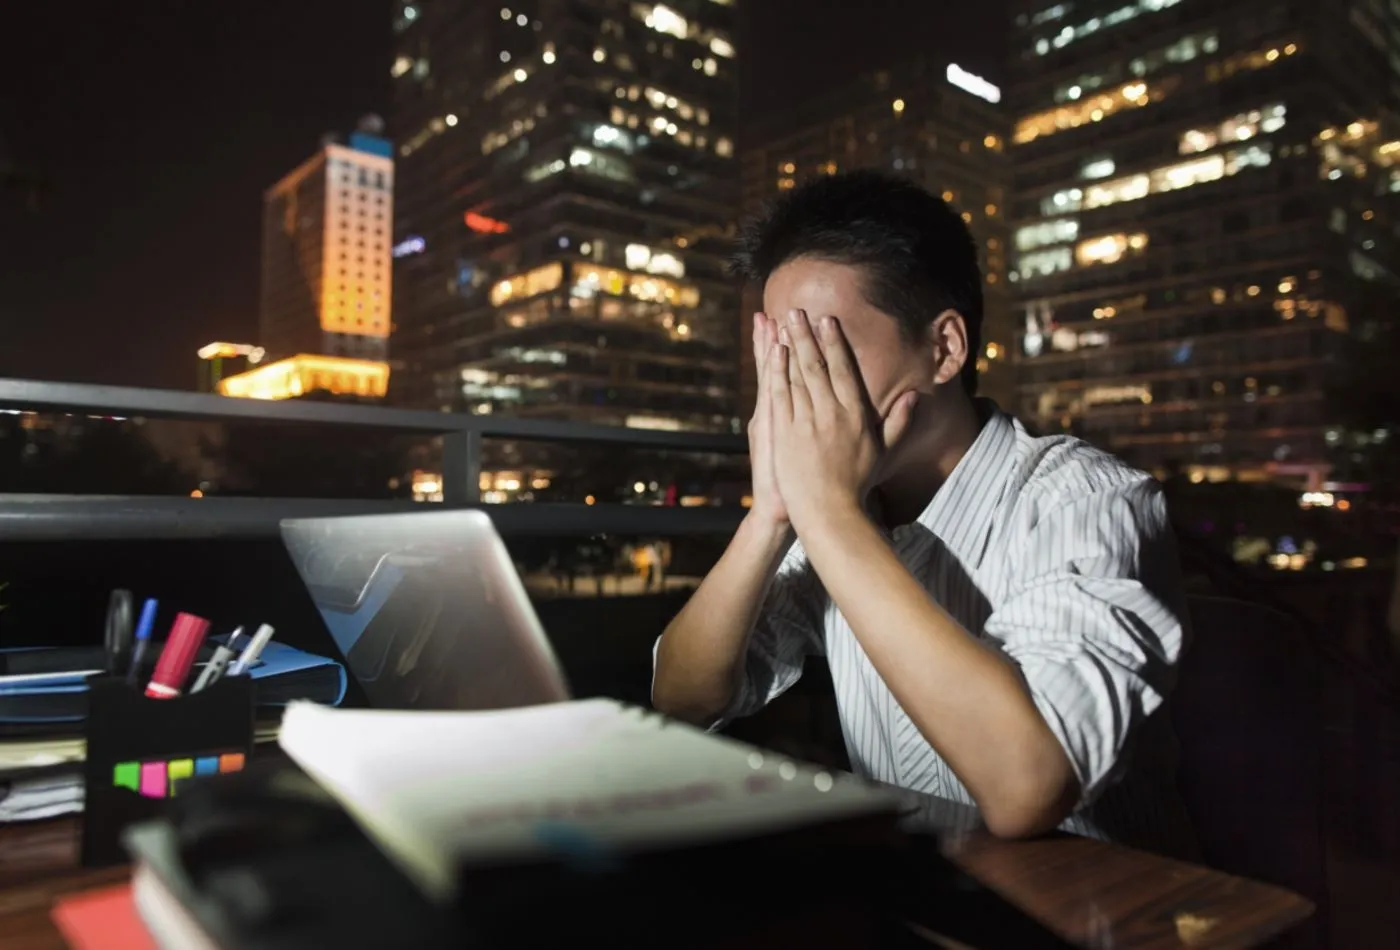 Is working night shifts bad for your health? - Quora